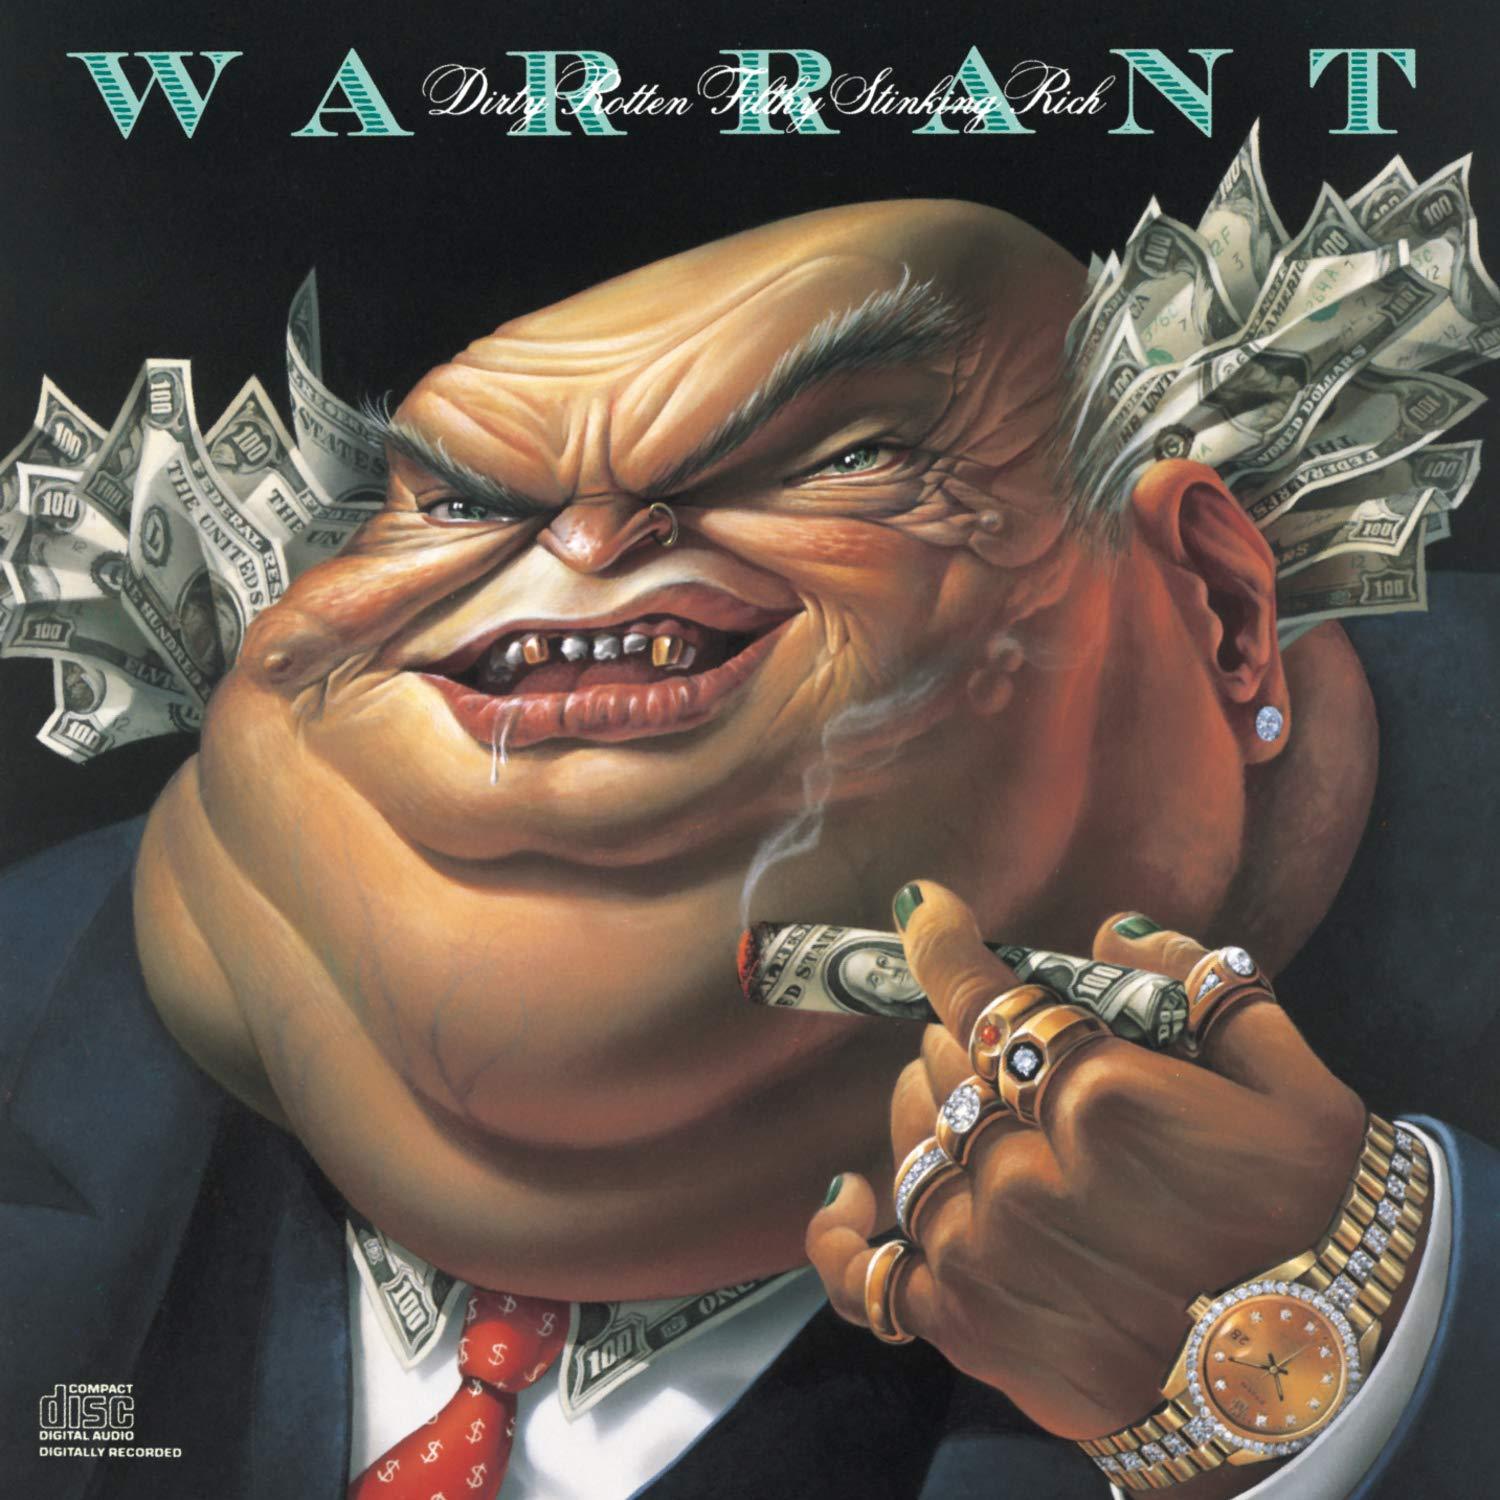 Warrant- Dirty Rotten Filthy Stinking Rich - Darkside Records